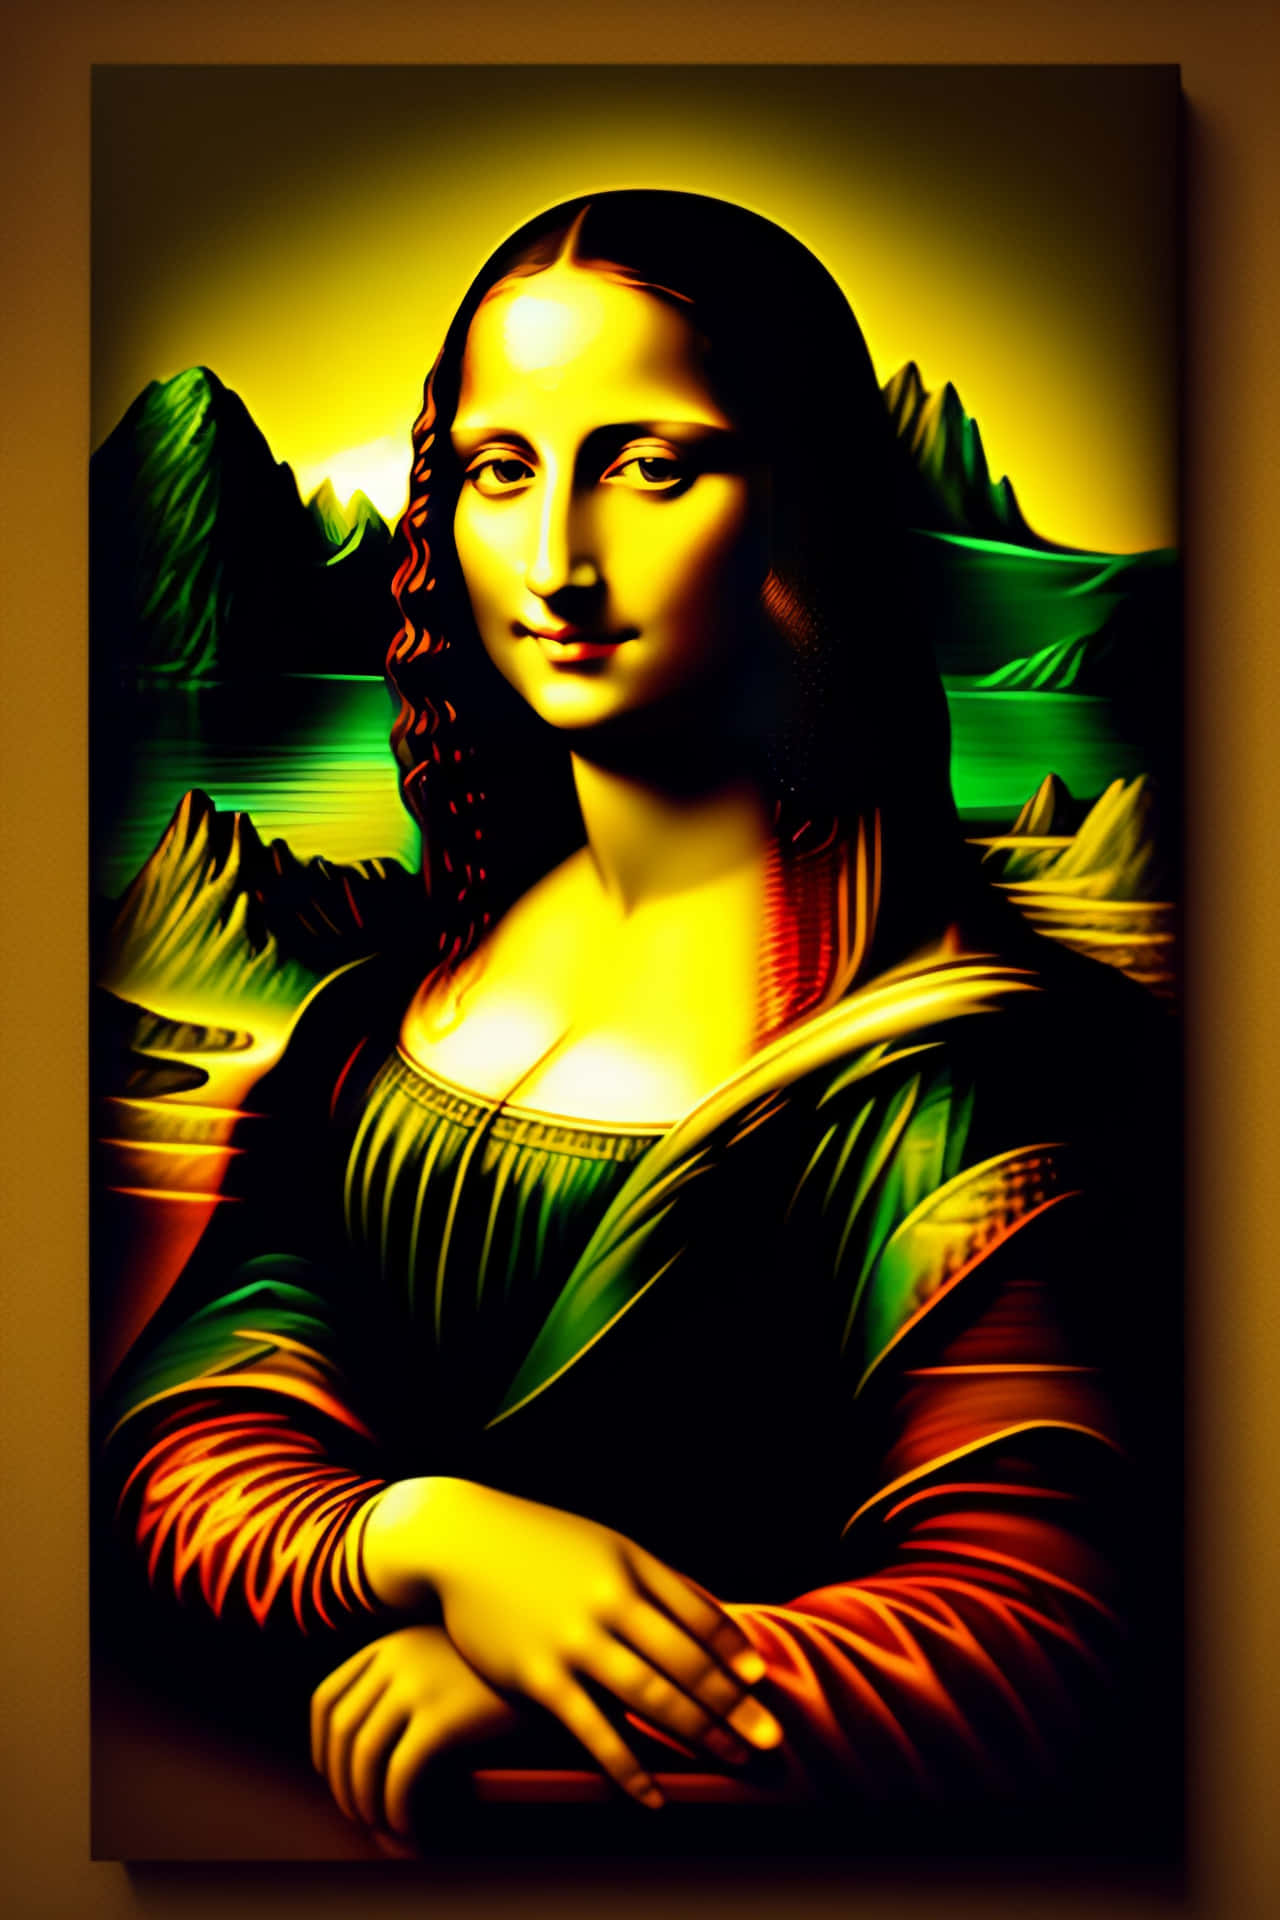 Caption: A Unique Perspective Of Mona Lisa's Alluring Beauty